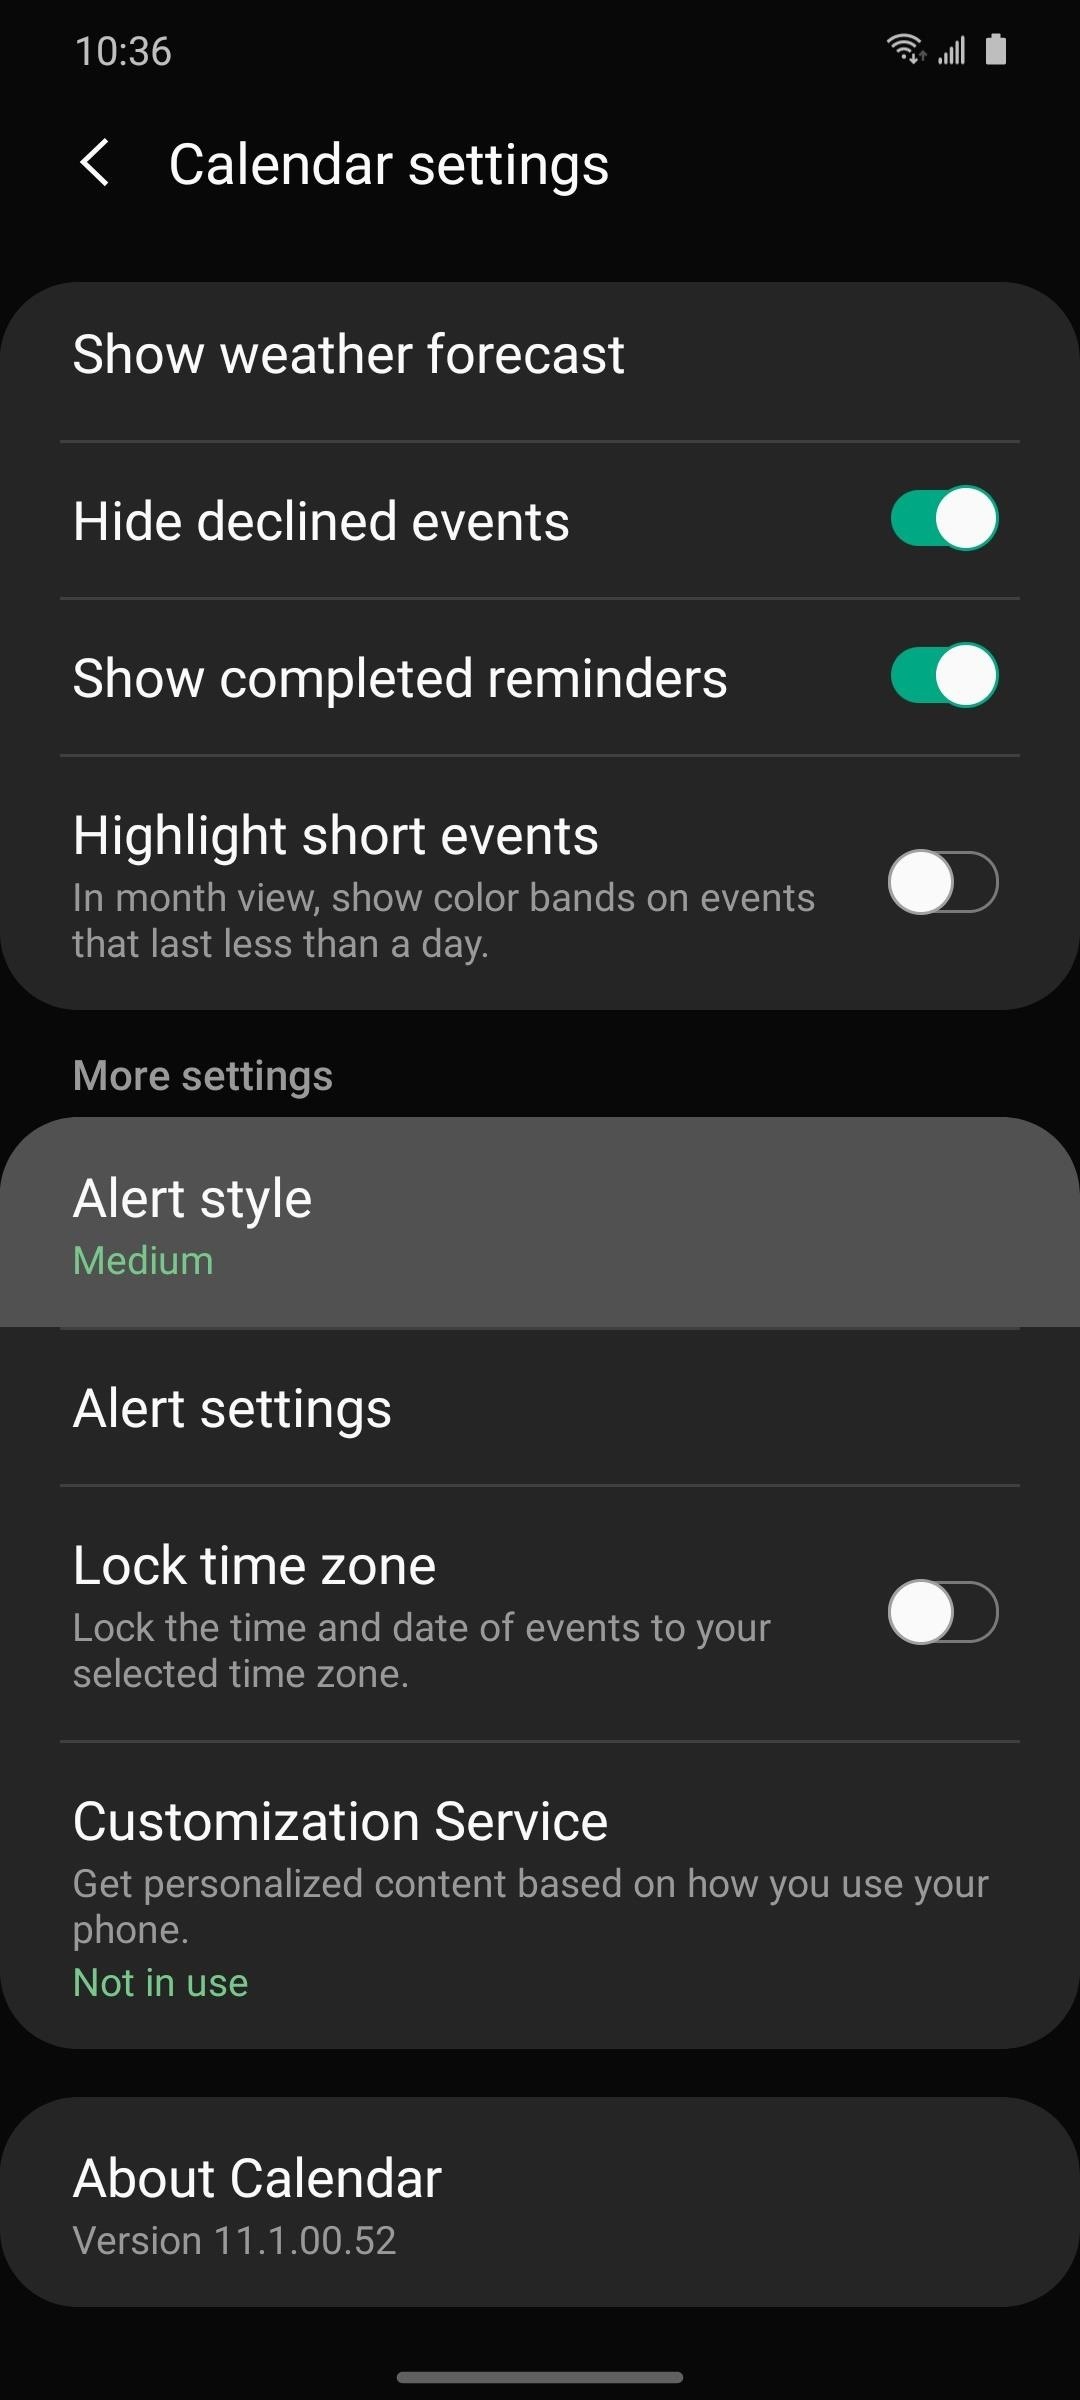 How to Disable the Full-Screen Calendar Alerts on Your Samsung Galaxy Phone